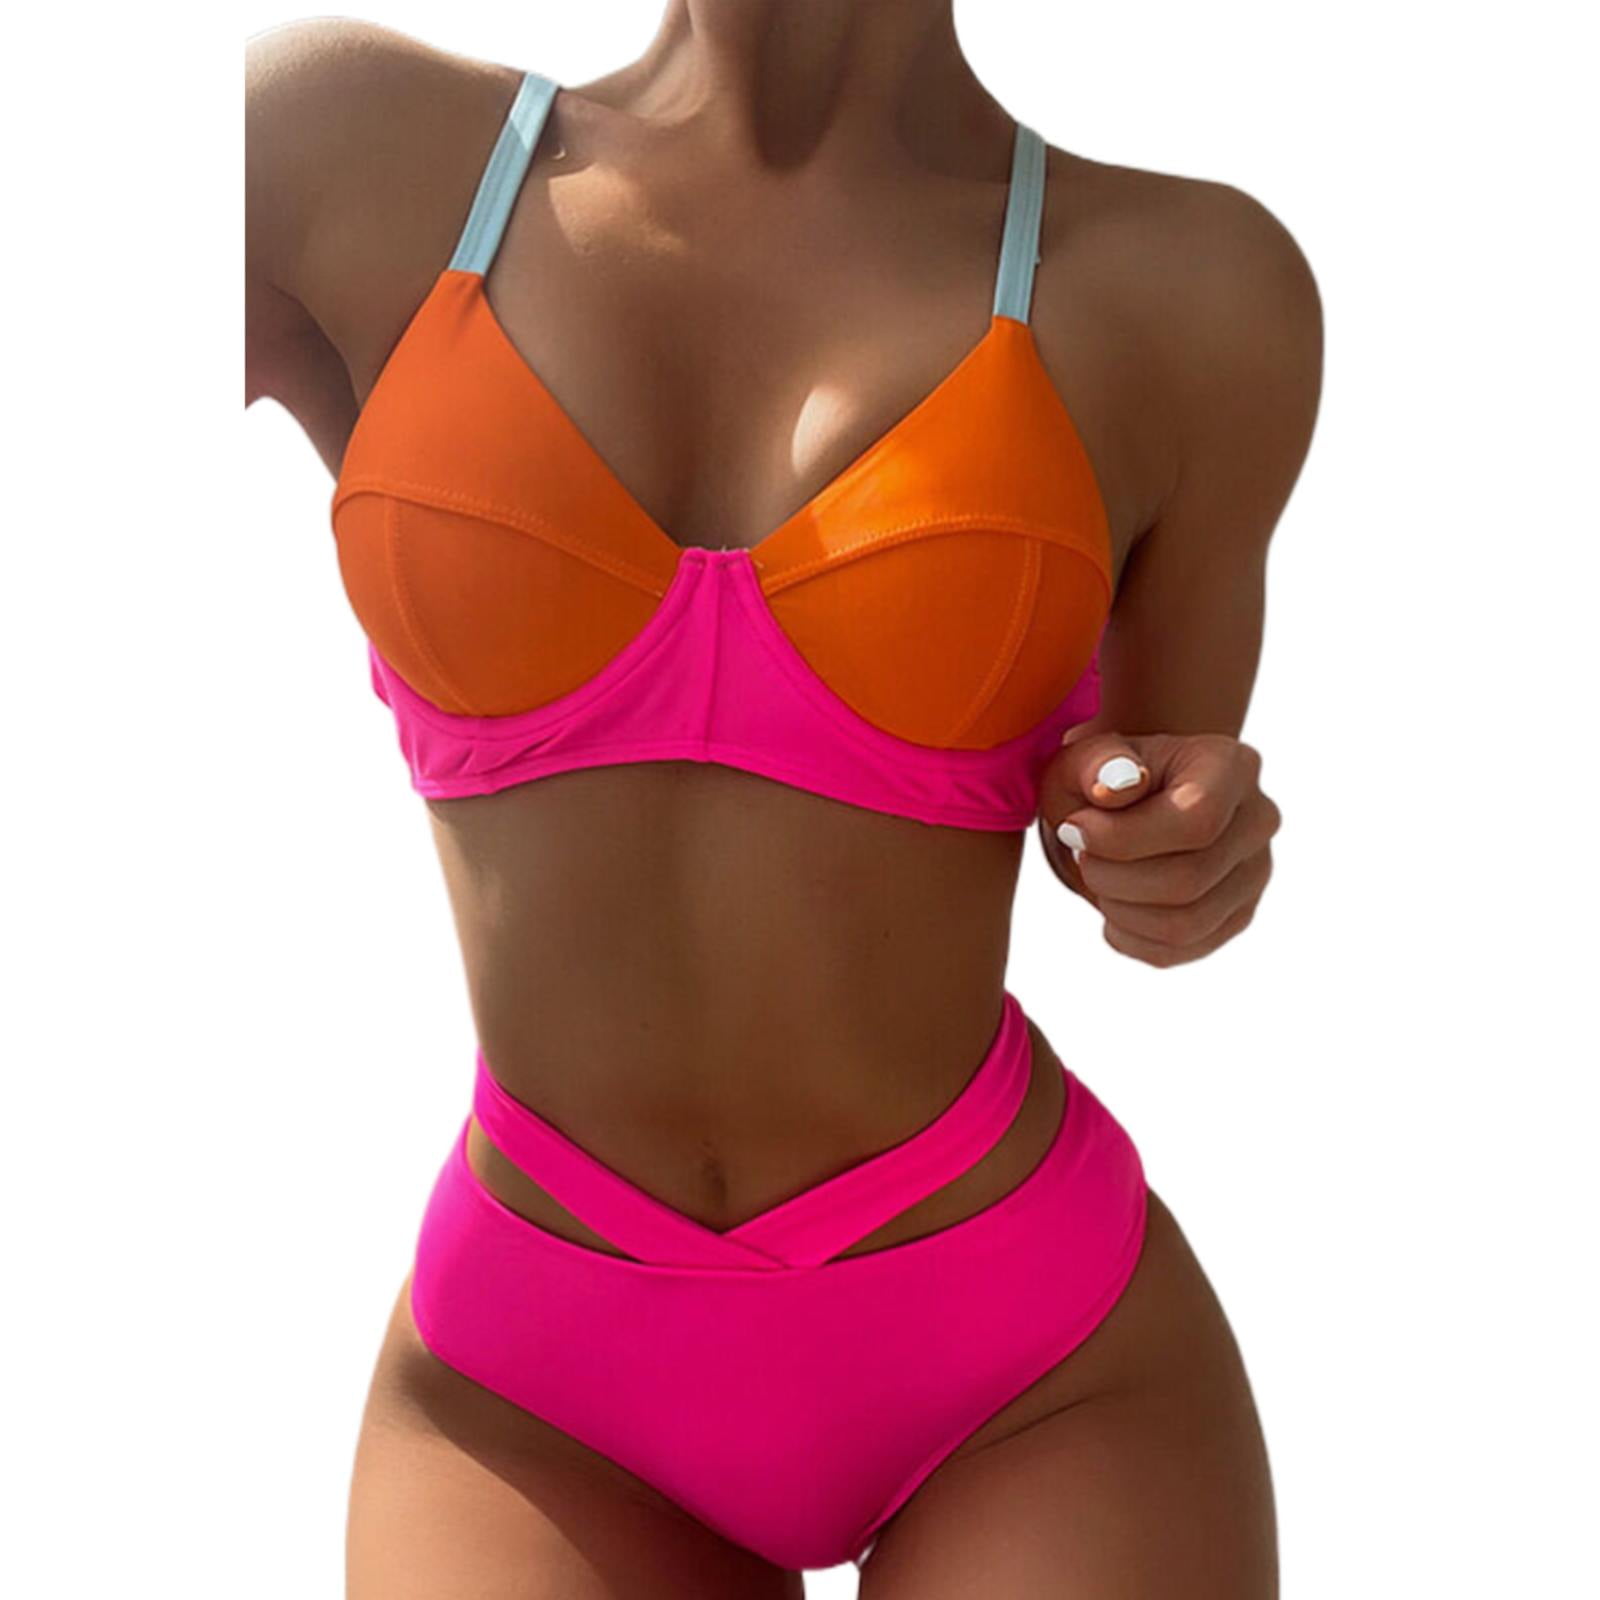 Solid Color Bikini Fashion High Elasticity Large Chest Gathered Backless  Swimsuit Set With Chest Pad High Waist Beach Swimwear 